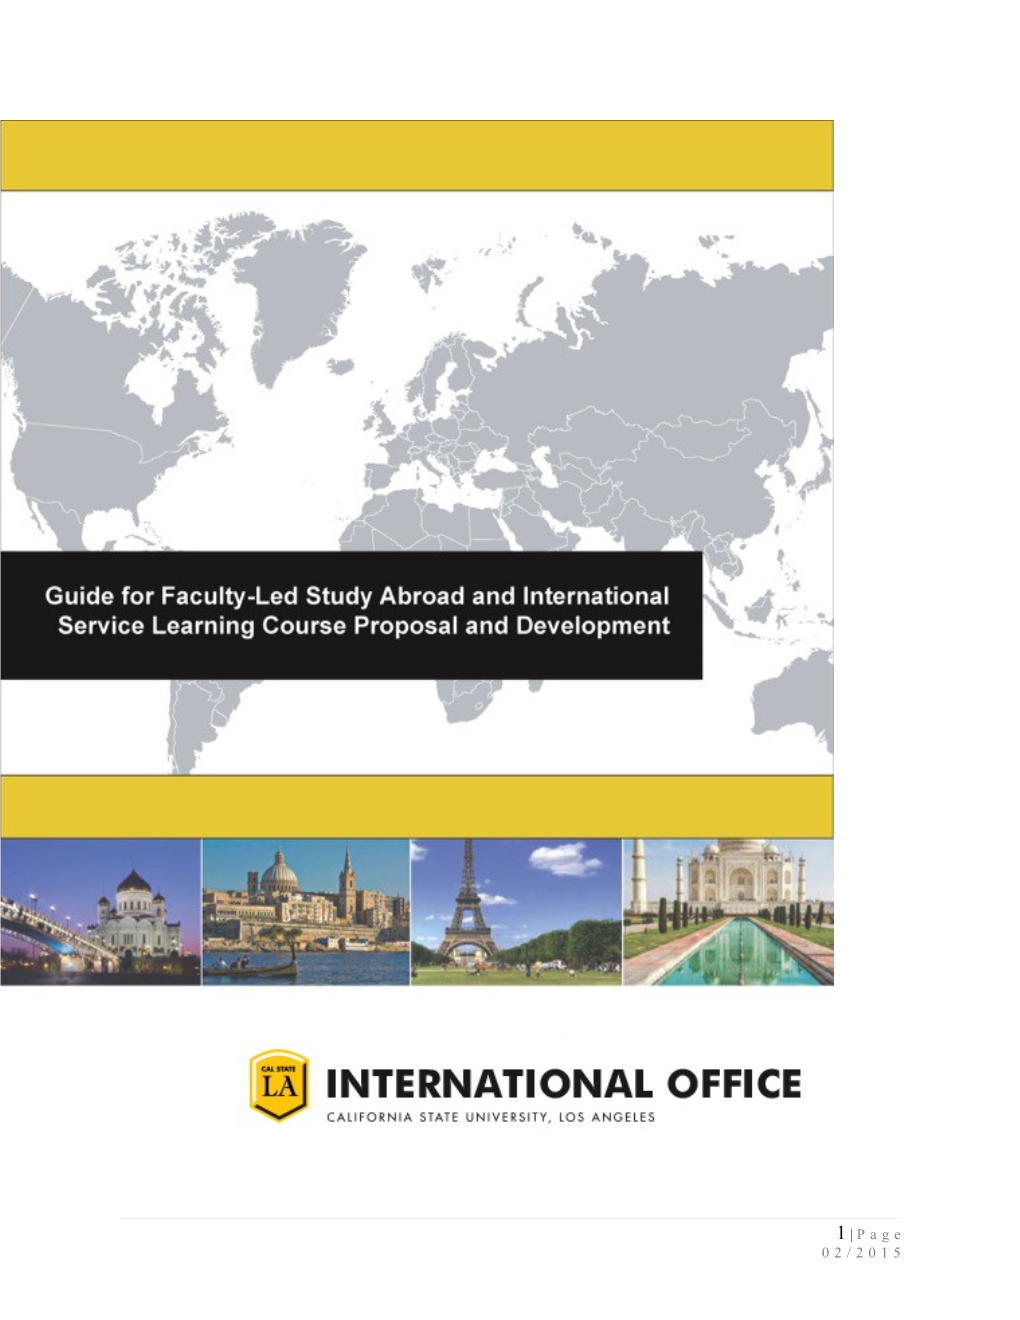 Guide for Faculty-Led Study Abroad and International Service Learning Course Proposal And